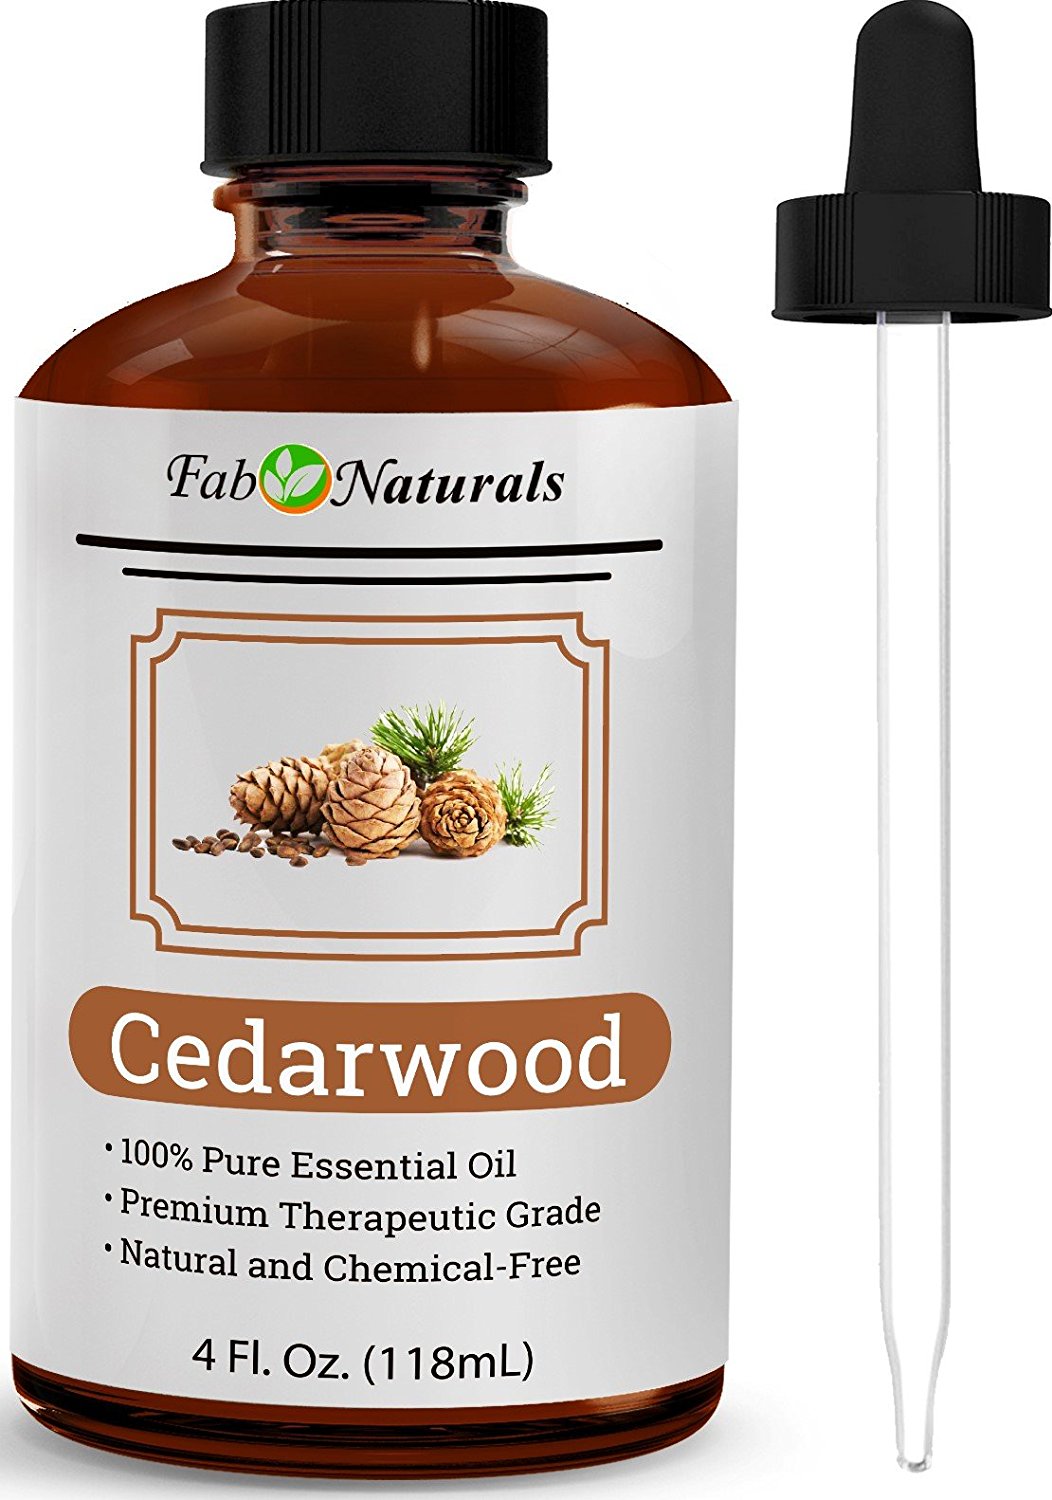 Fab Naturals Cedarwood Essential Oil 4 Oz, 100% PURE Texas Oil for Diffuser, Hair, Dogs, Pests, Fleas